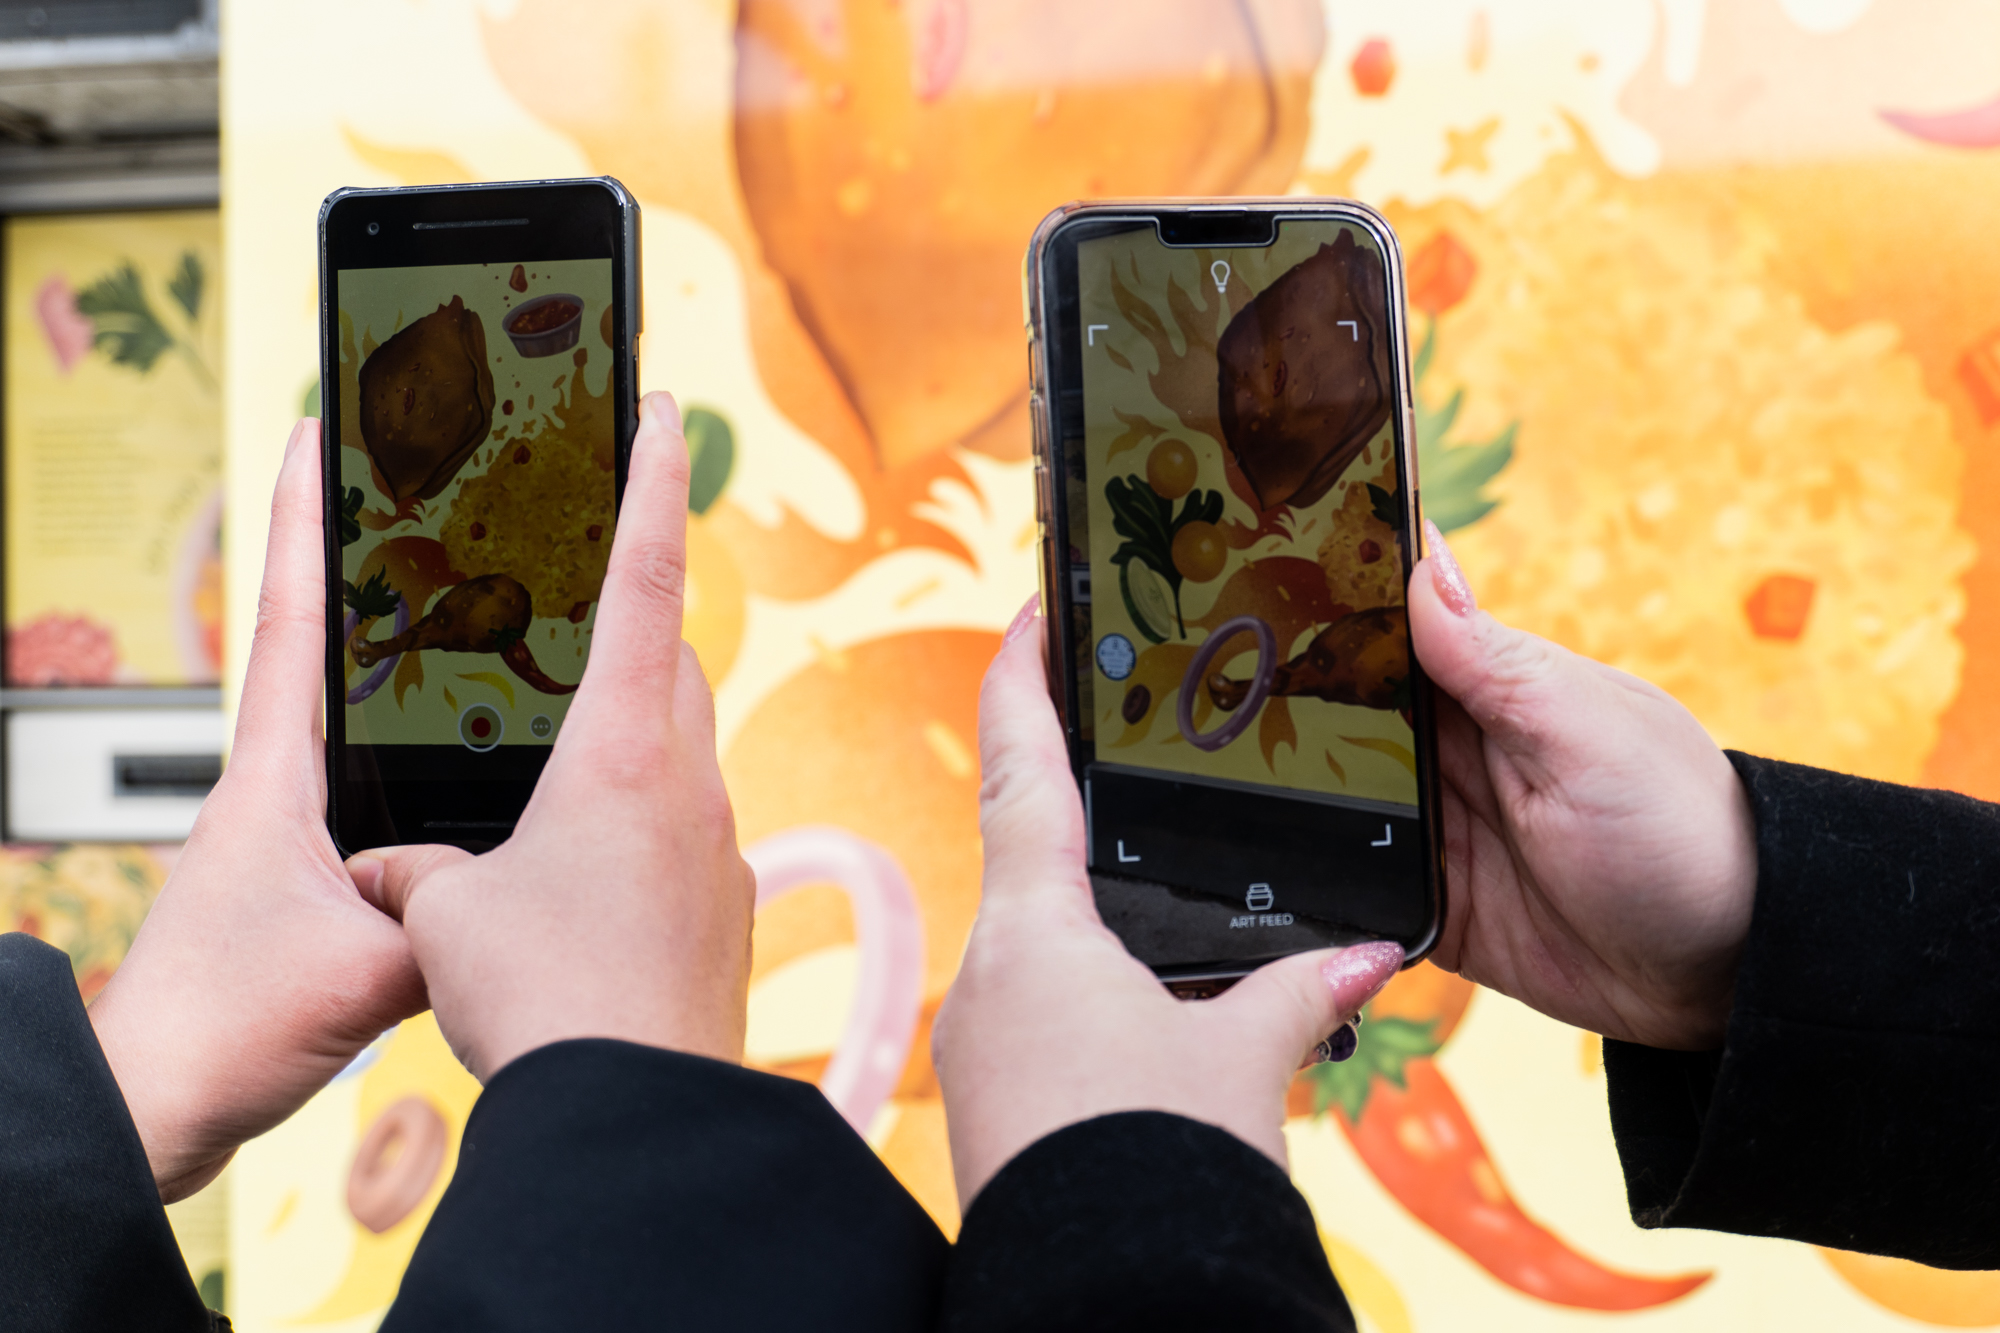 Participants use Augmented Reality features to explore a public art storefront activation by artists Meegan Lim and Jen Liv in Brampton, Ontario